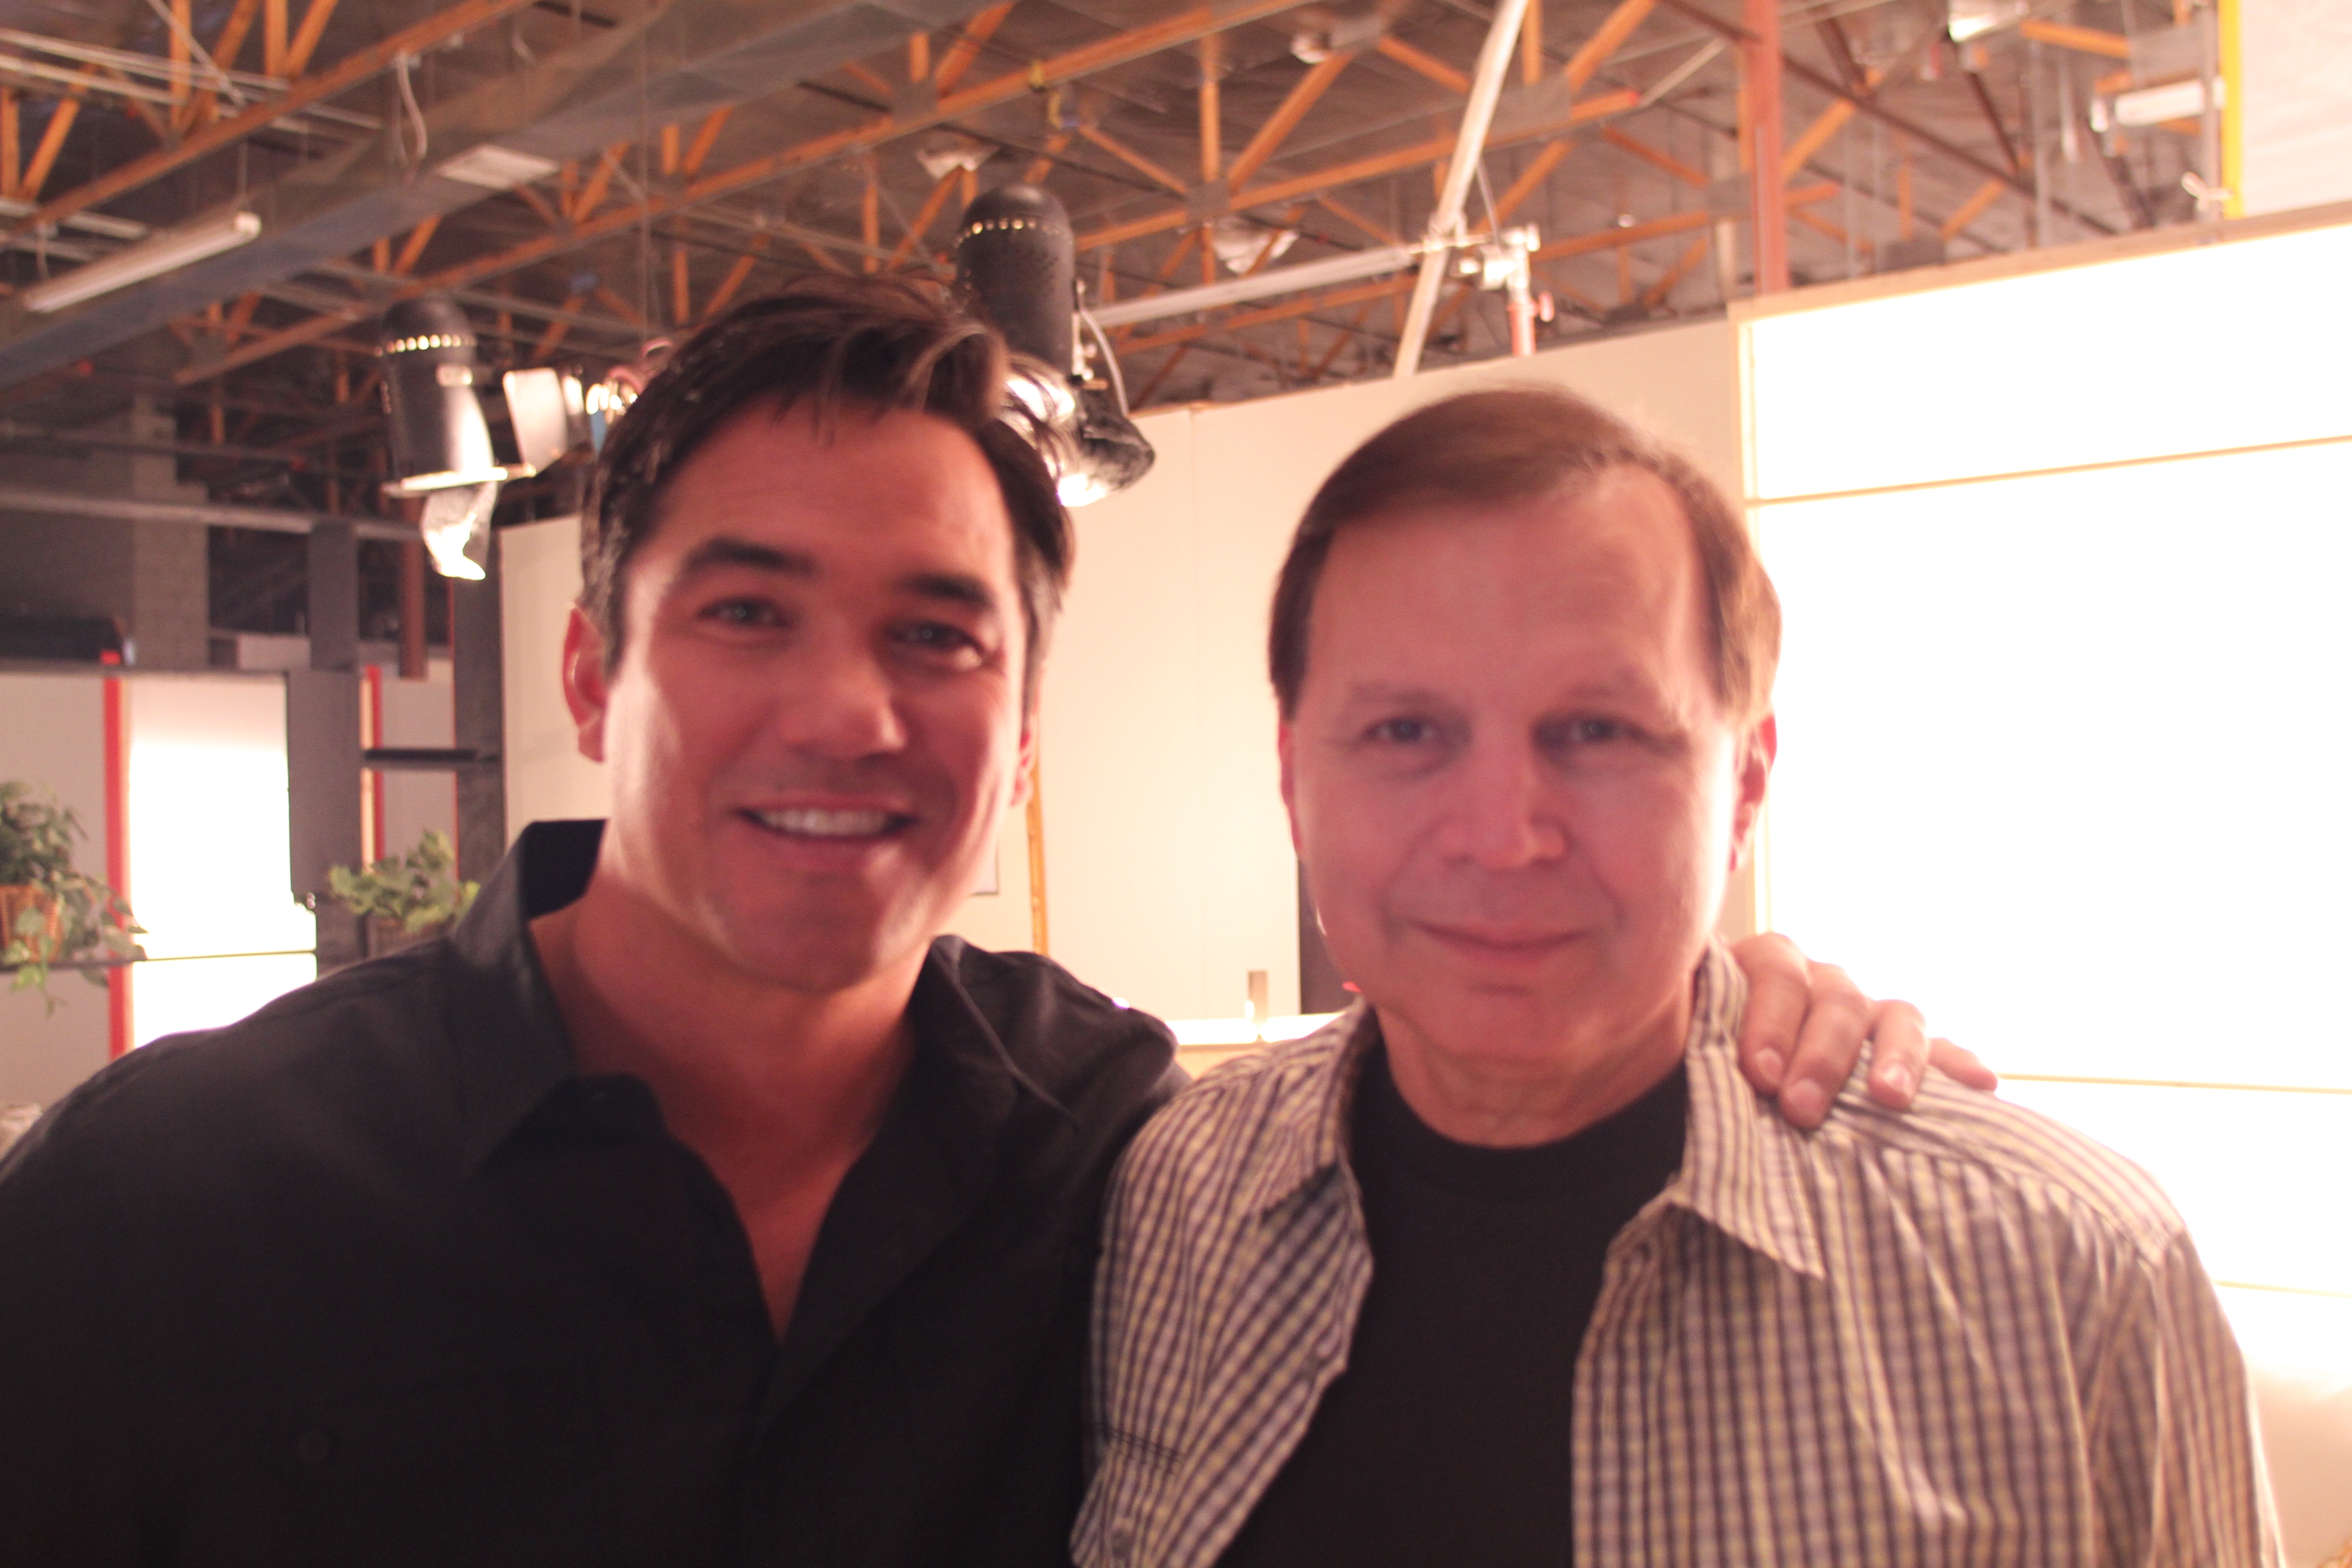 Dean Cain and Michael Z. Gordon on the set of Dirty Little Trick